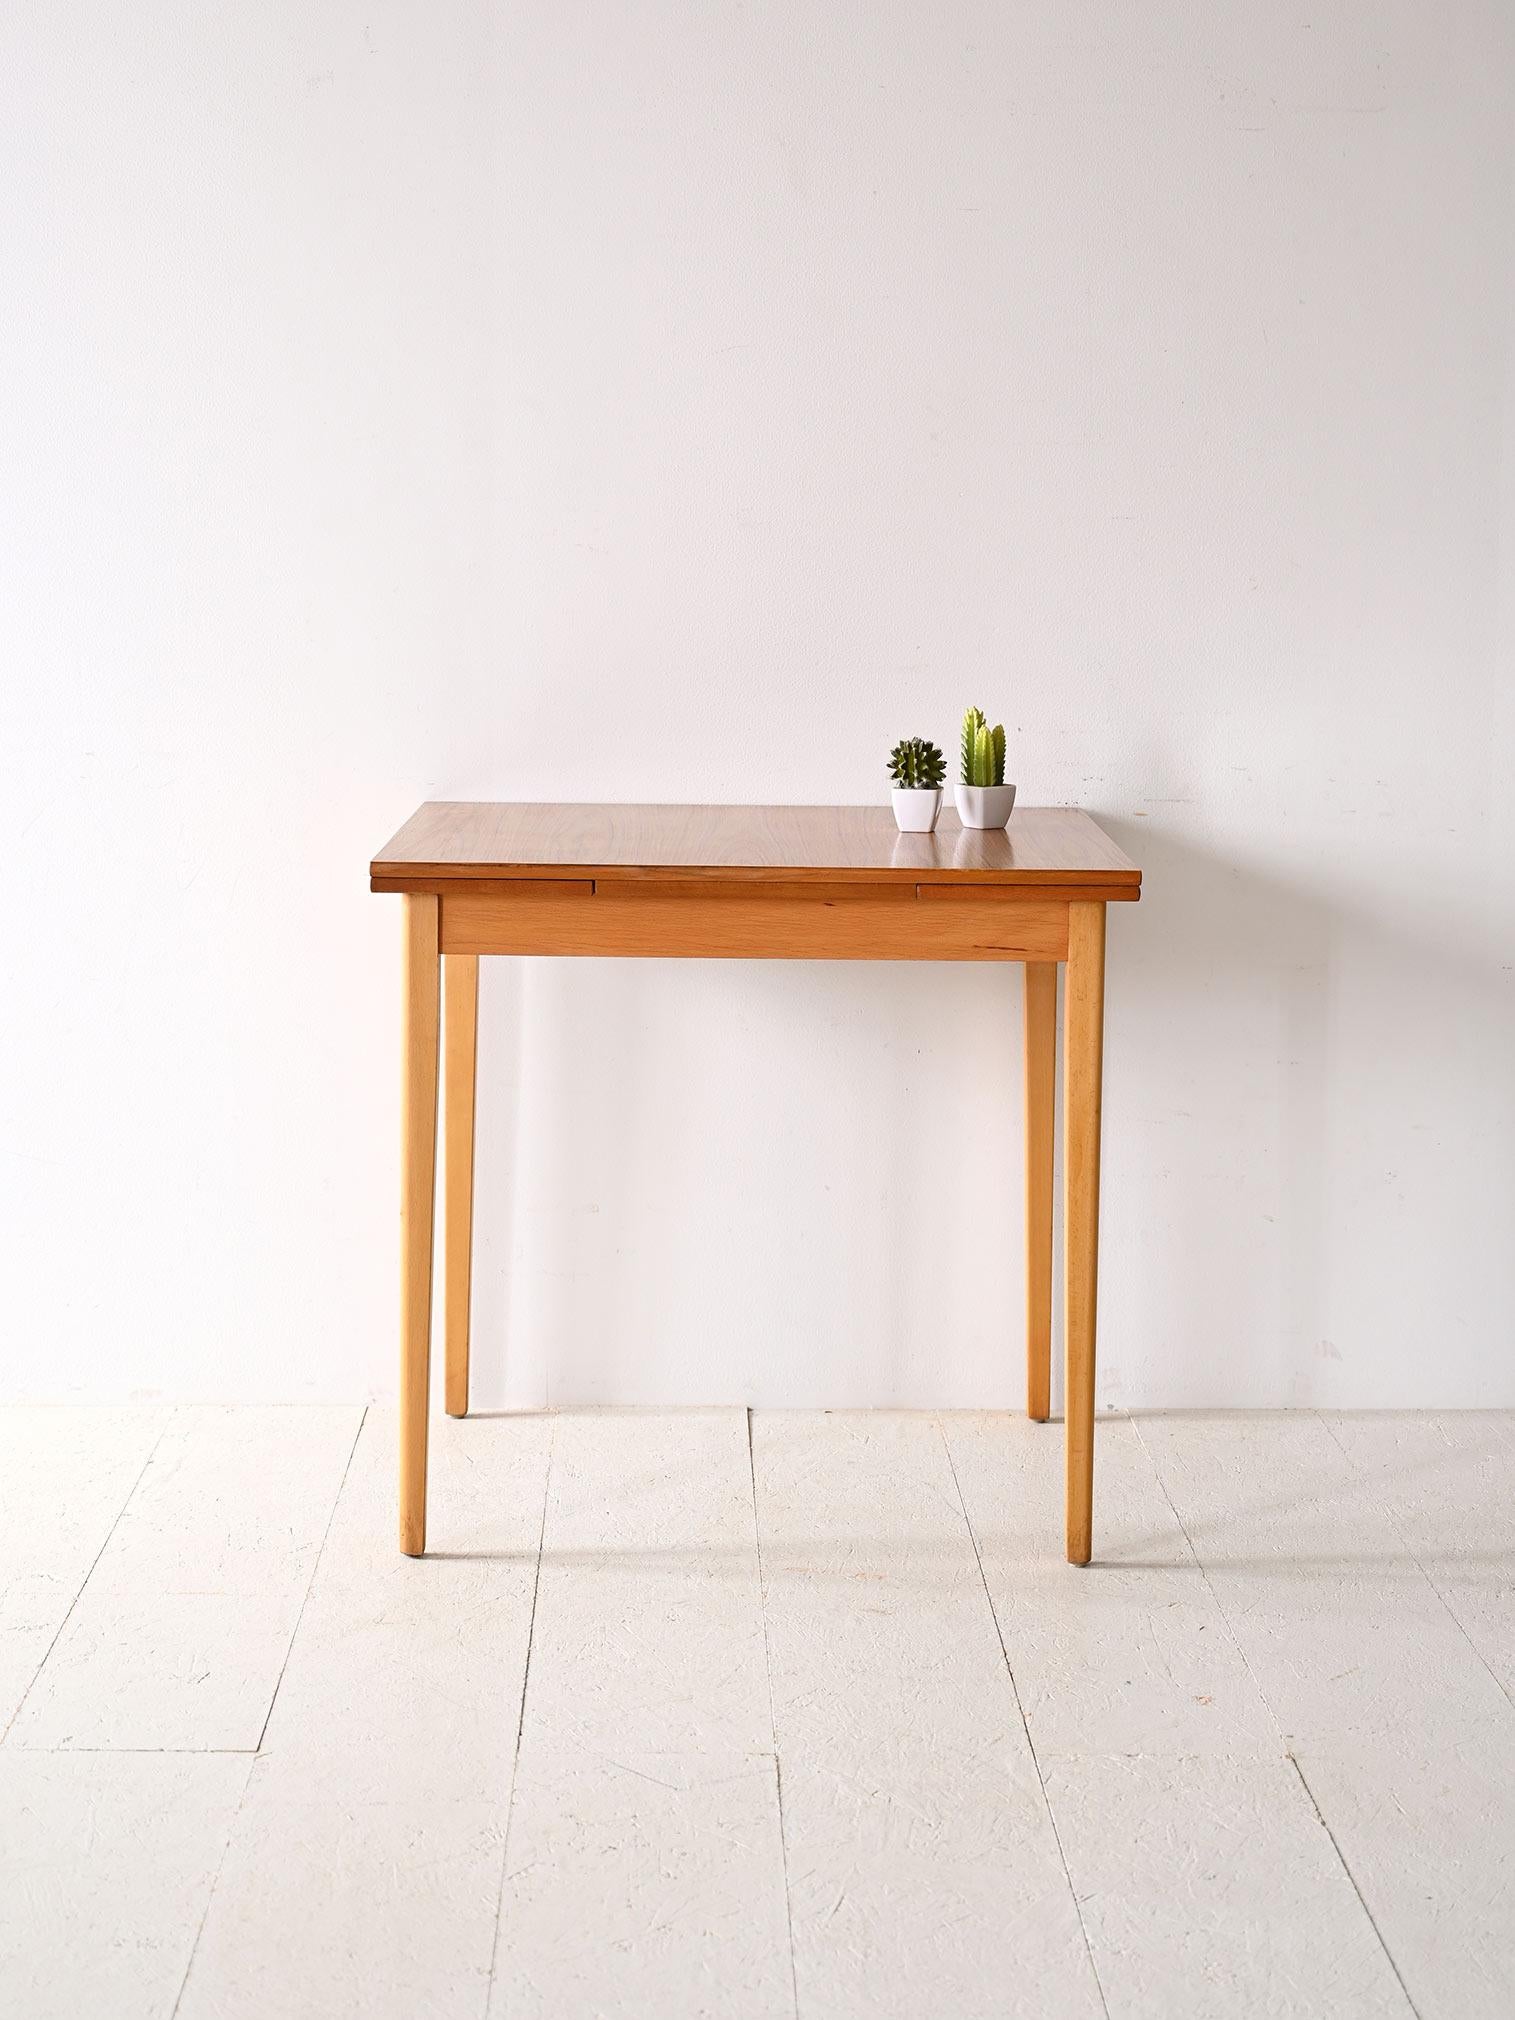 1950s table made of wood and formica top.

This vintage furniture piece of Nordic origin traces the taste and functionality typical of Scandinavian design. The supporting structure is made of light birch wood while the top is made of formica to